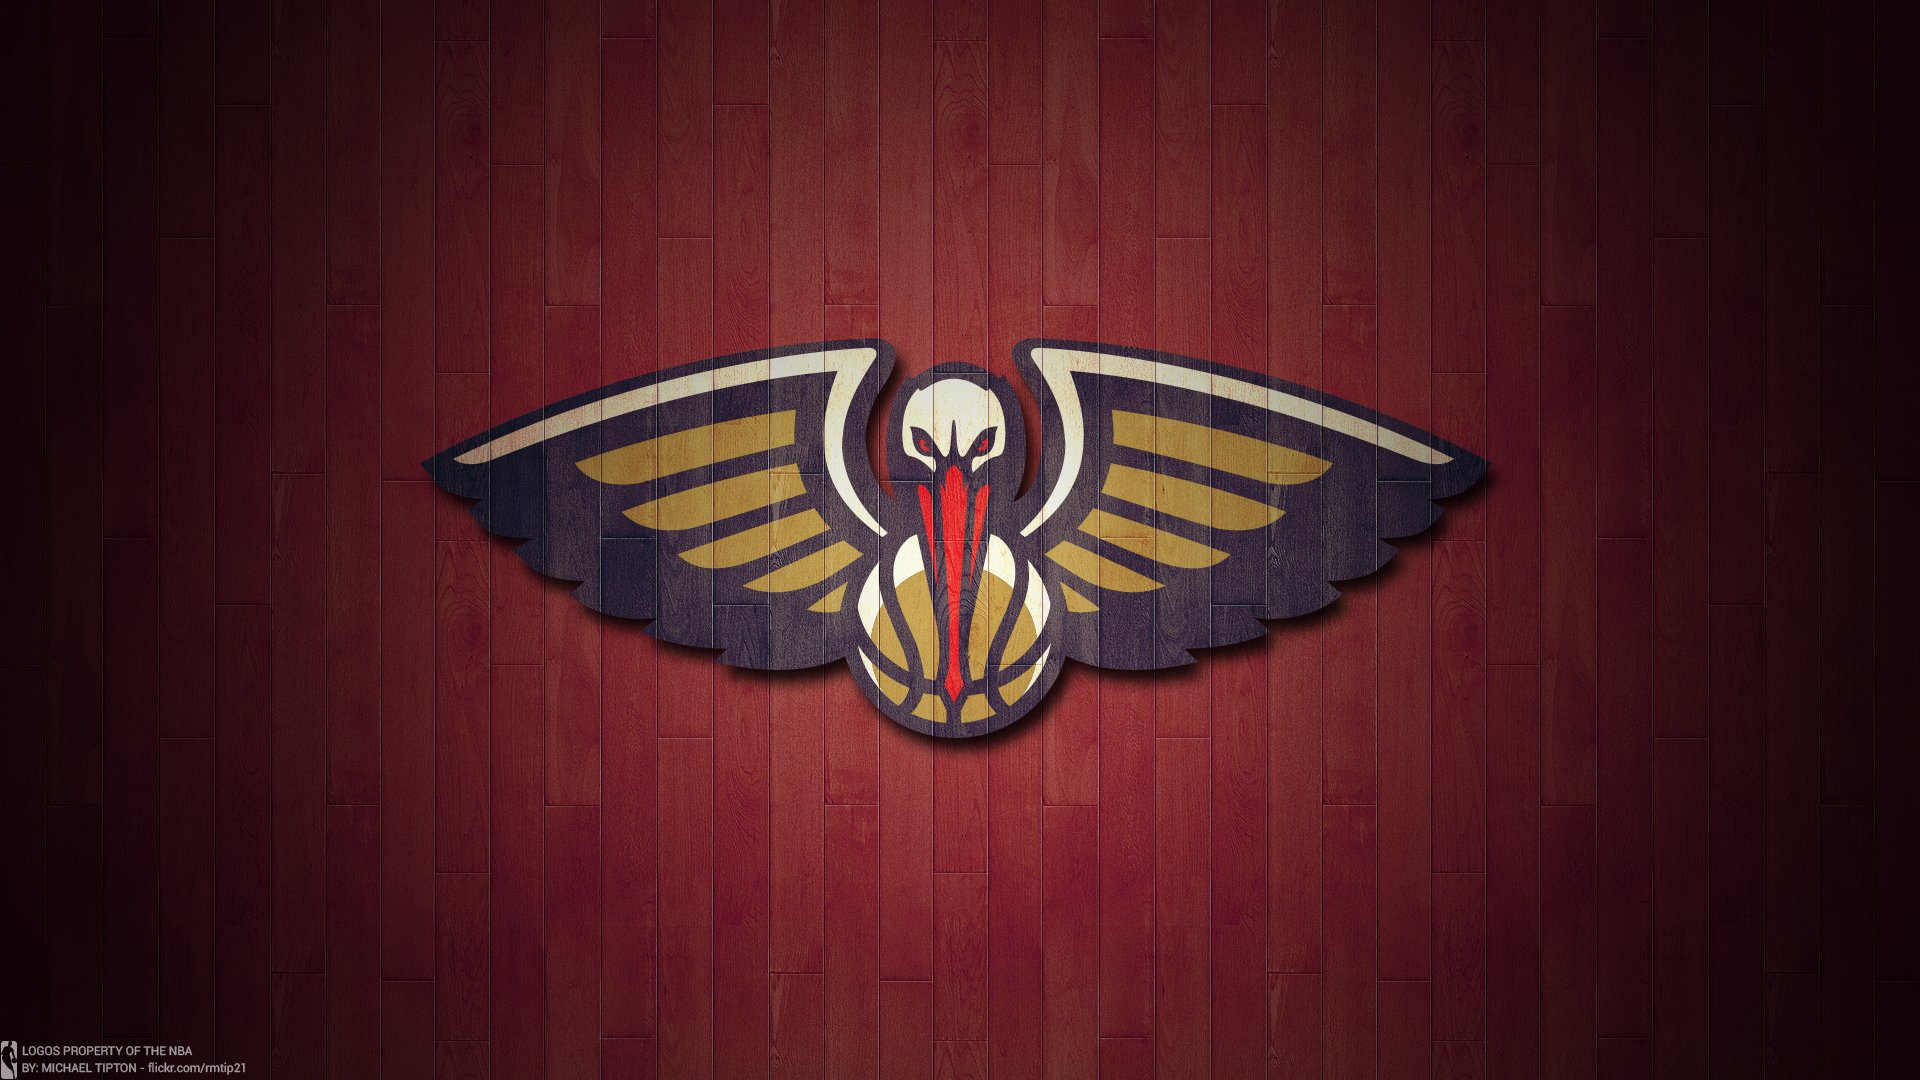 New Orleans Pelicans Wallpapers - Wallpaper Cave